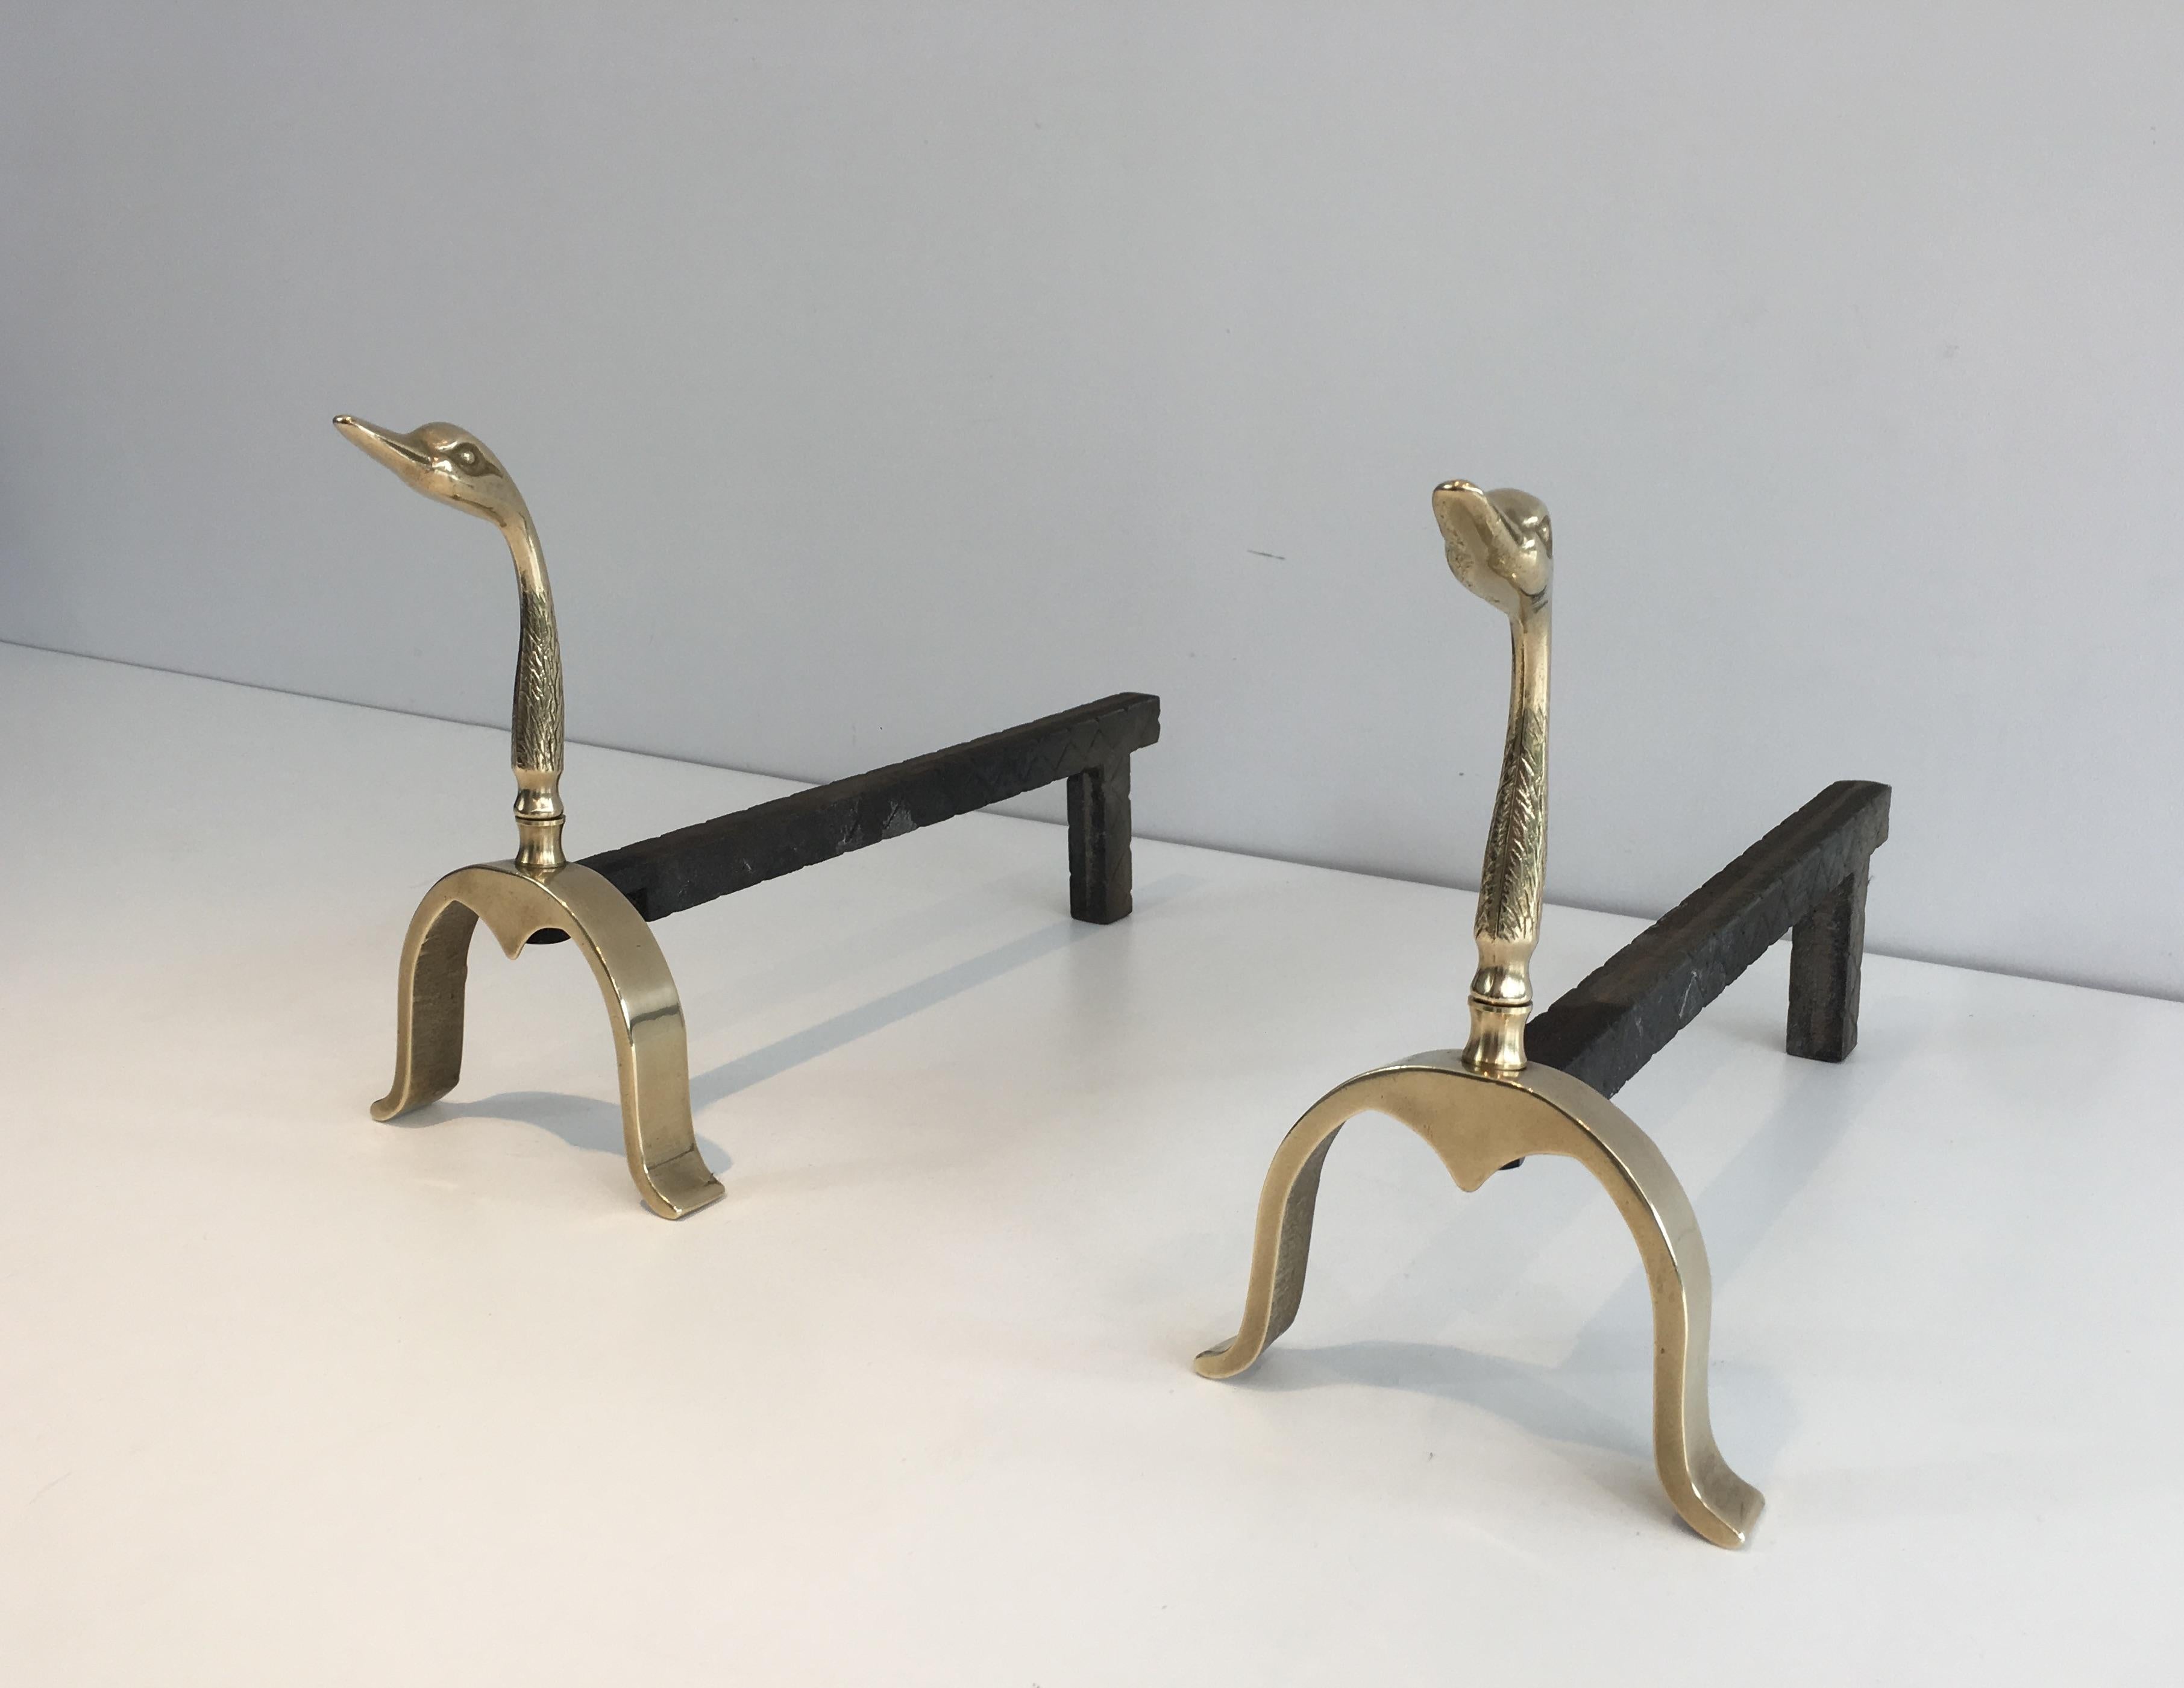 This pair of neoclassical andirons made of brass and iron are displaying duck heads. This is a French work, in the style of Maison Jansen, circa 1960.